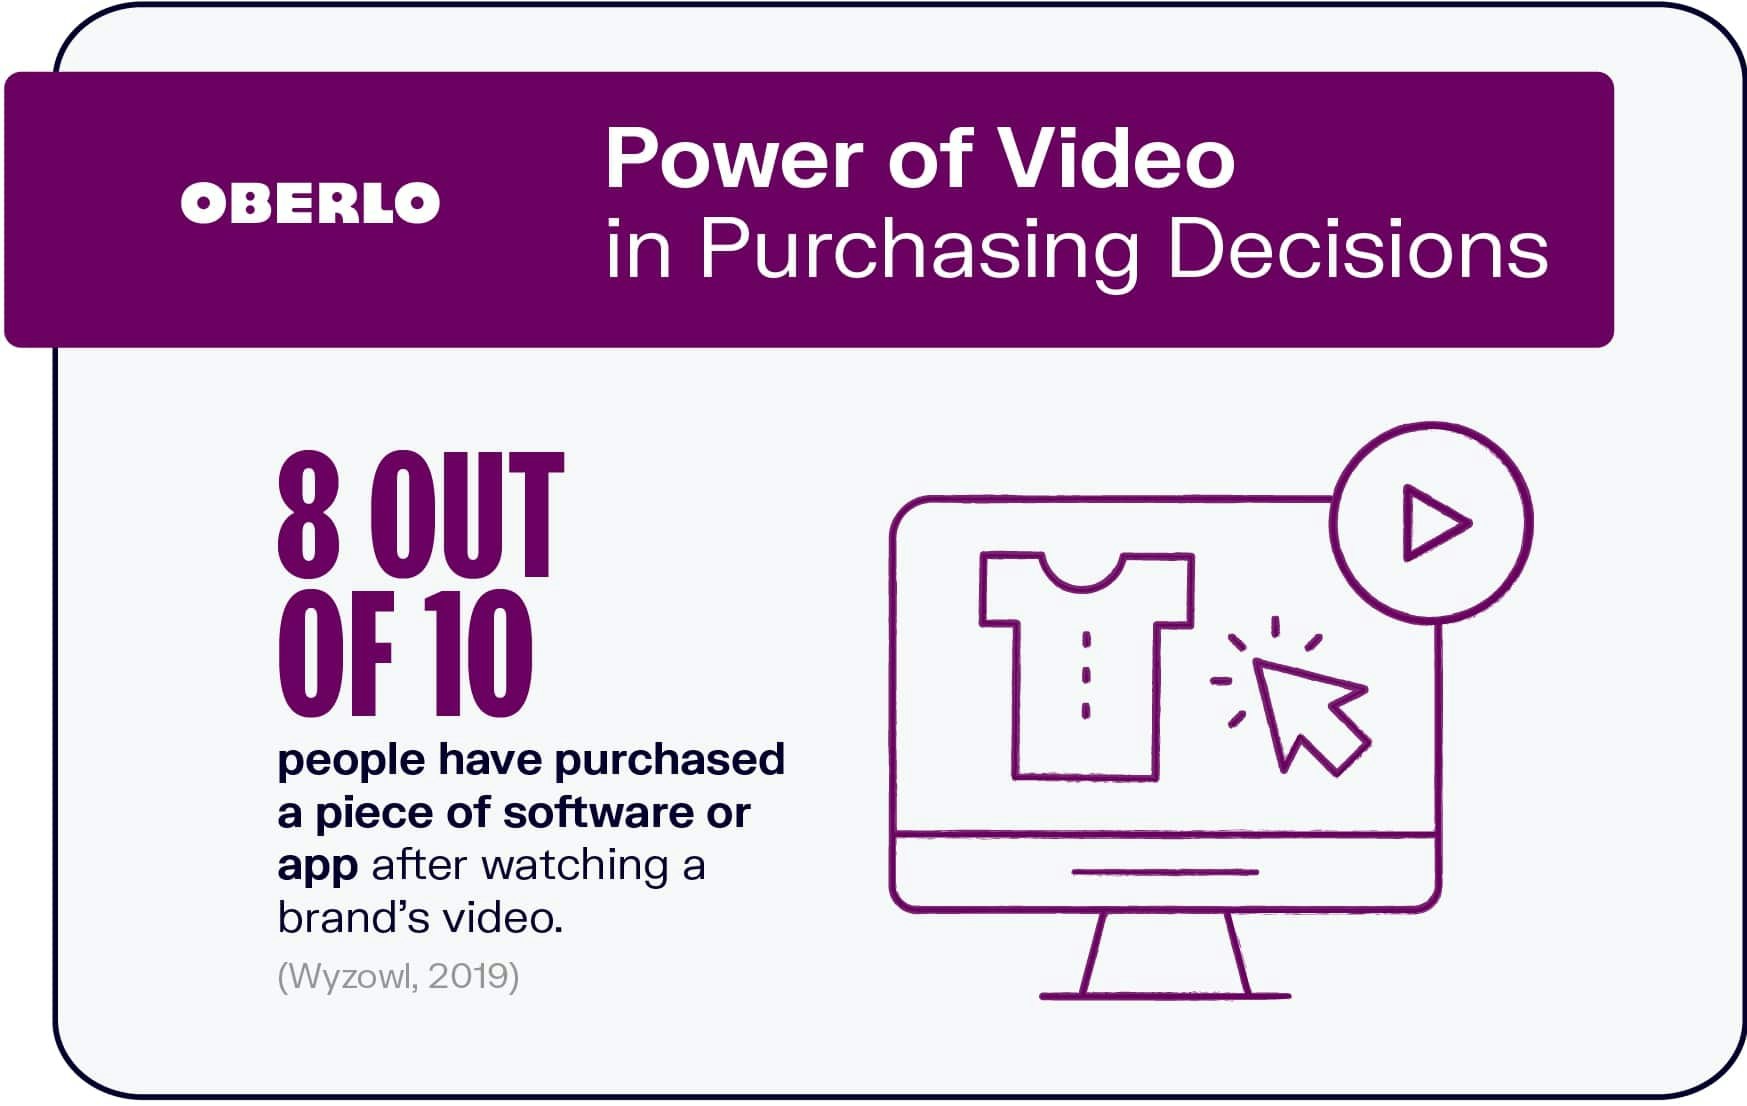 Oberlo's study on power of video in purchasing decisions